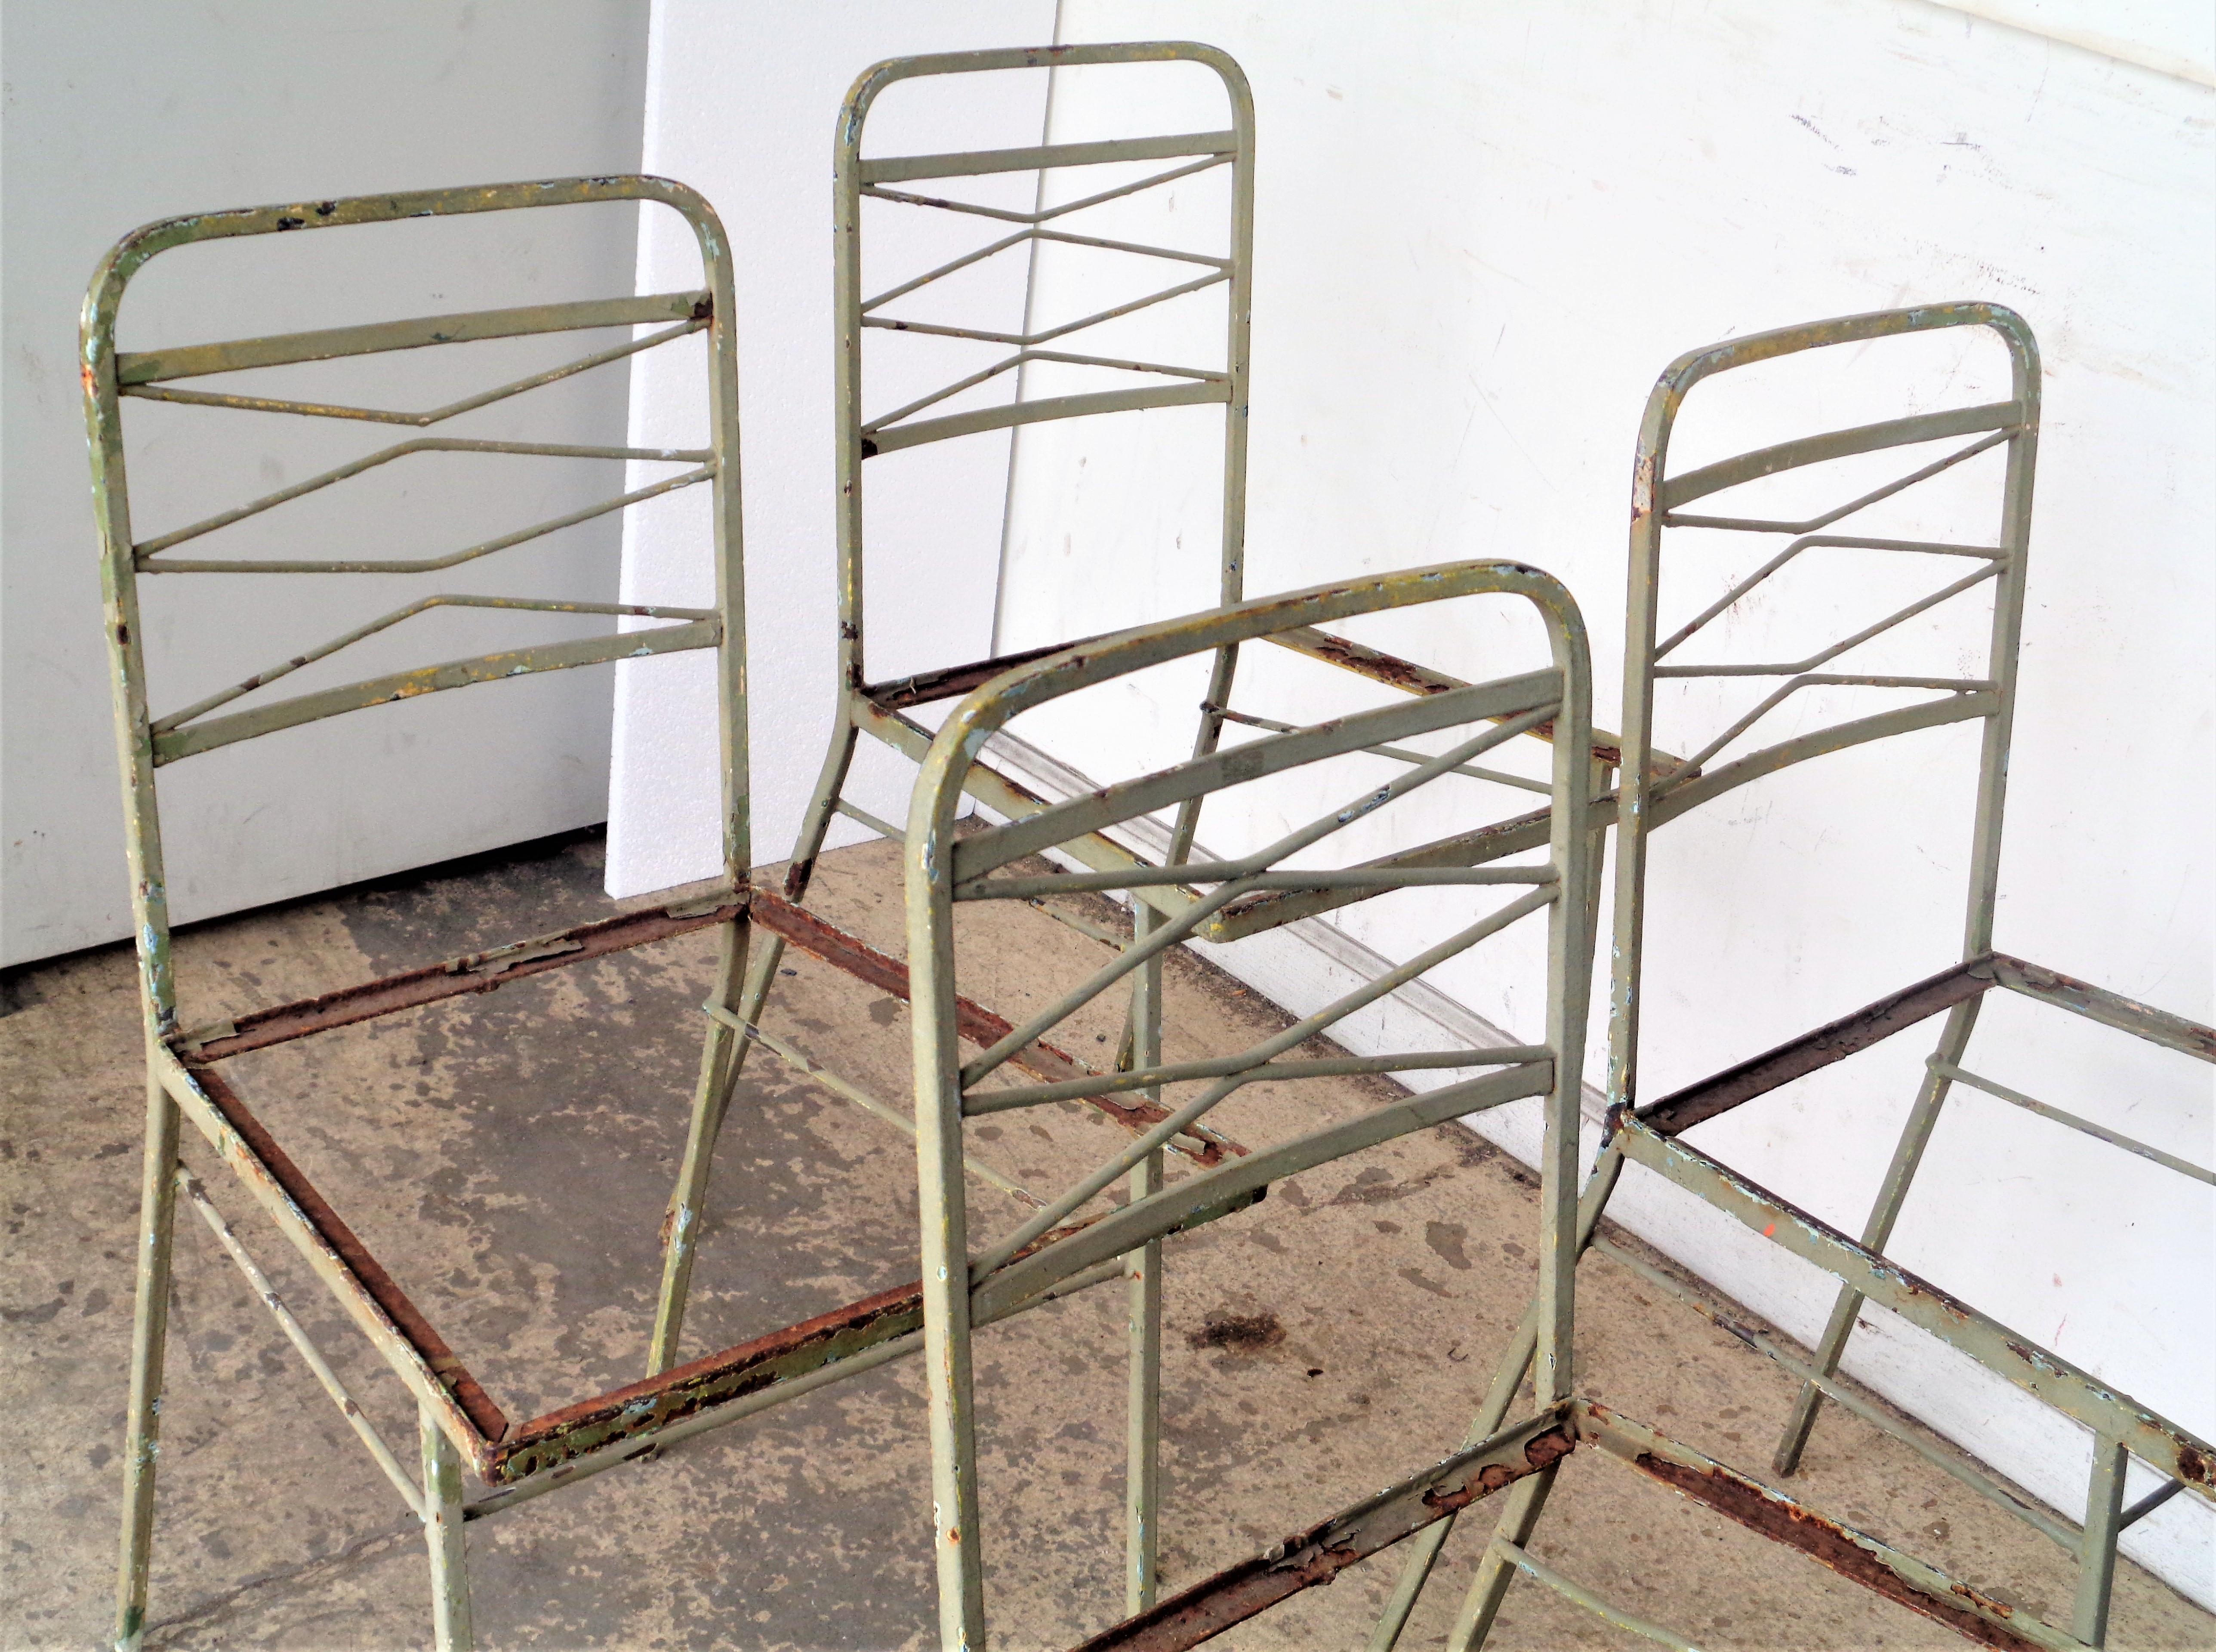   1940's Modernist Wrought Iron Chairs, Set of Four For Sale 1